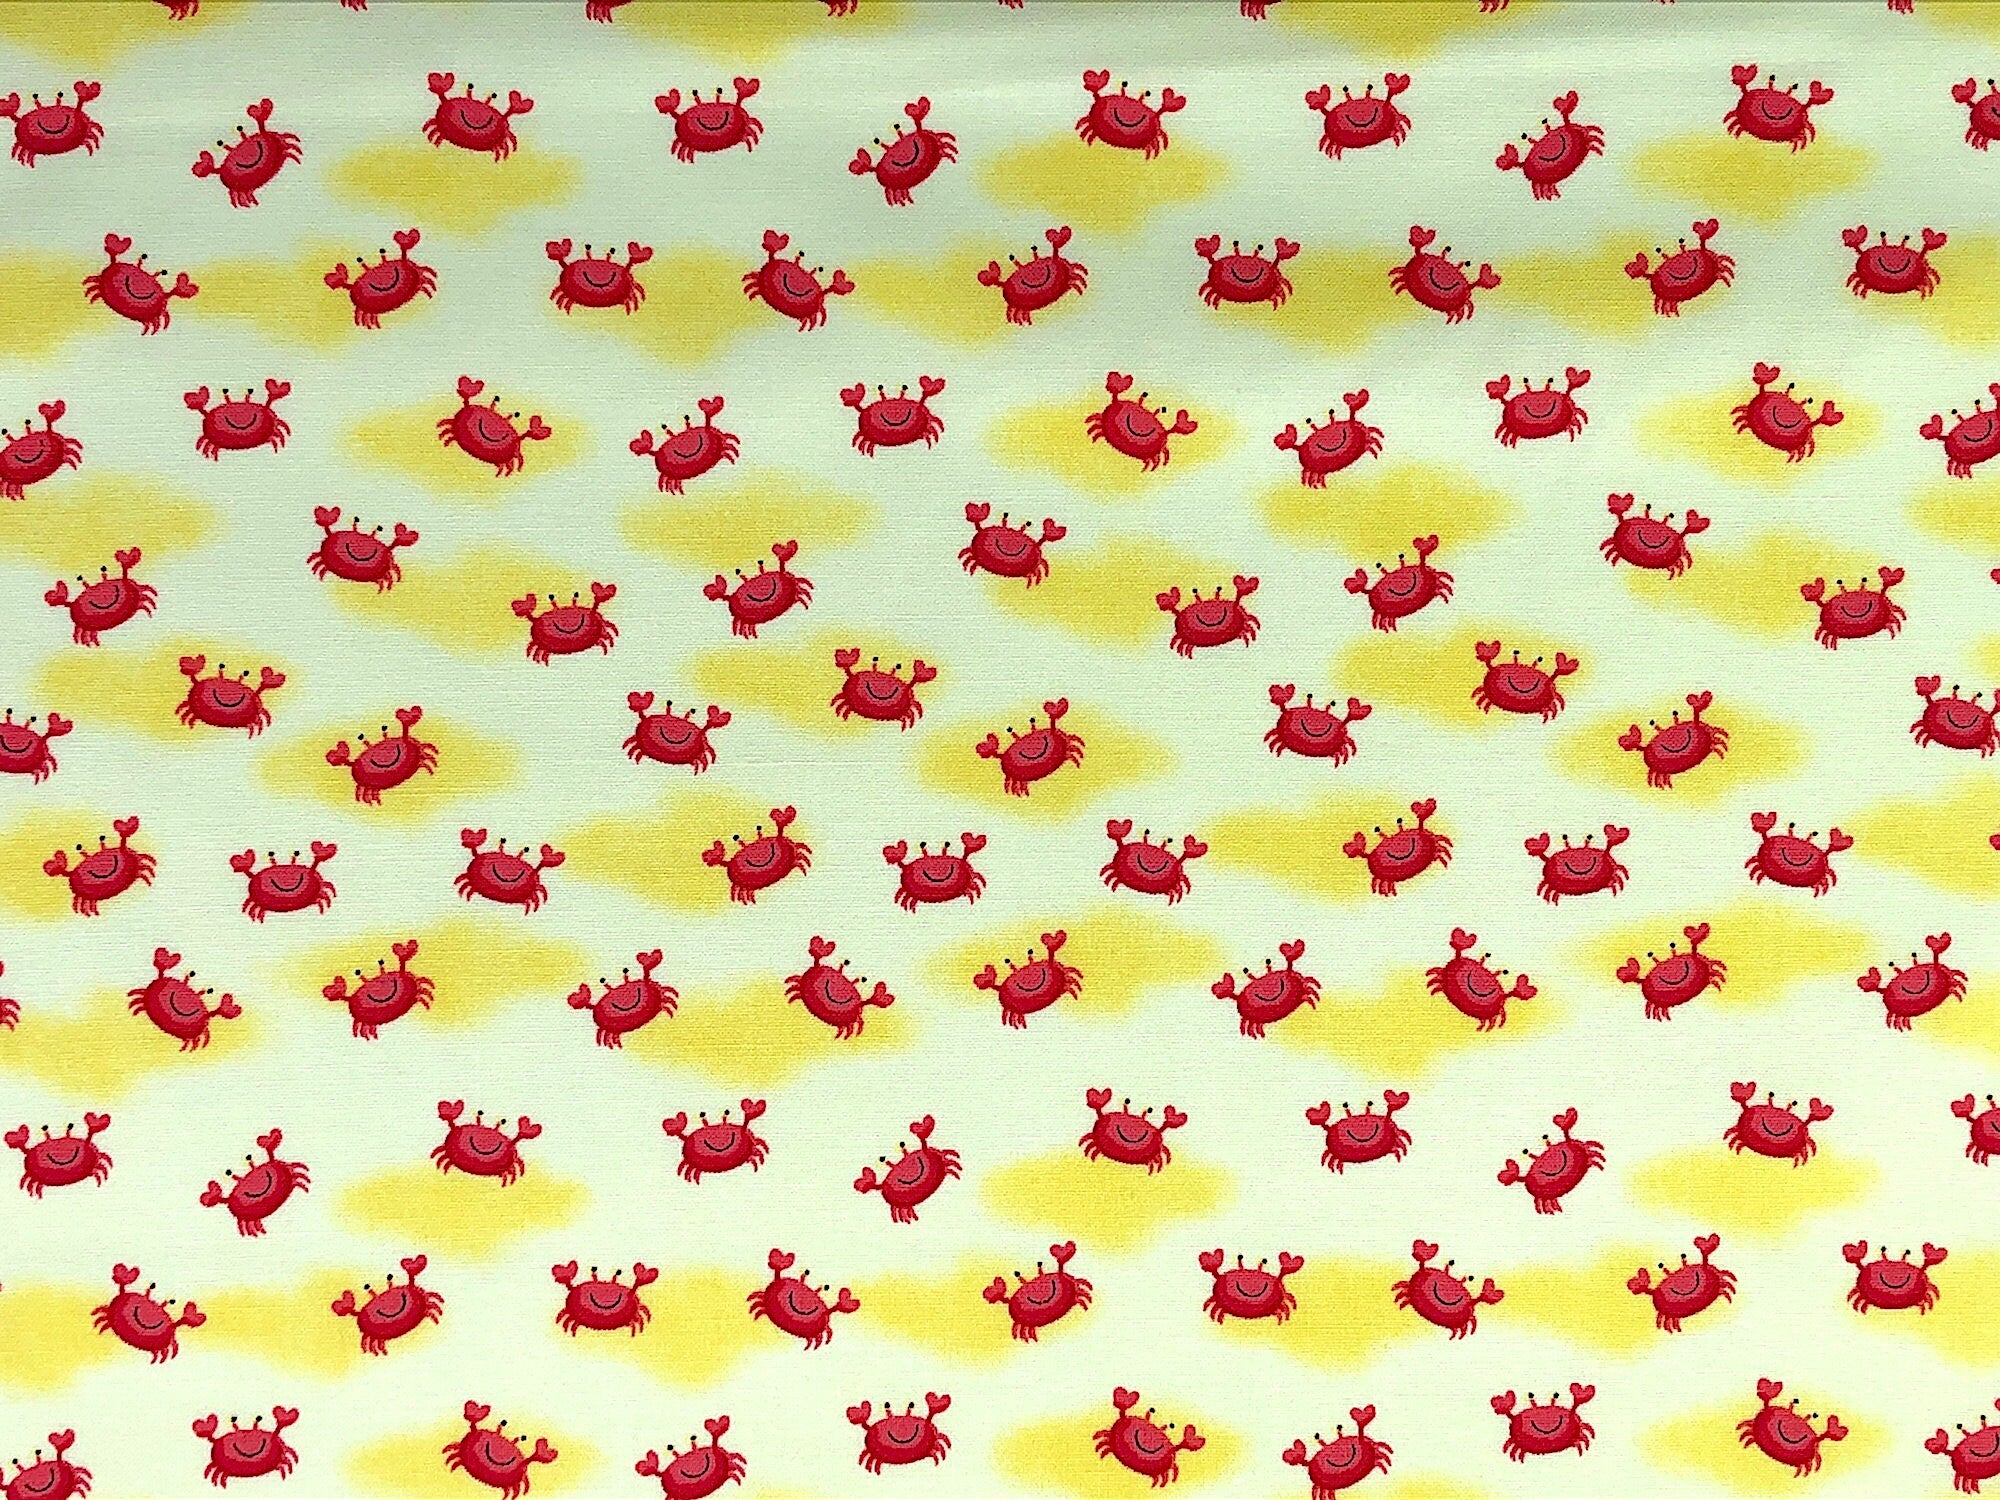 This yellow fabric is covered with crabs that have the claws raised in the air.